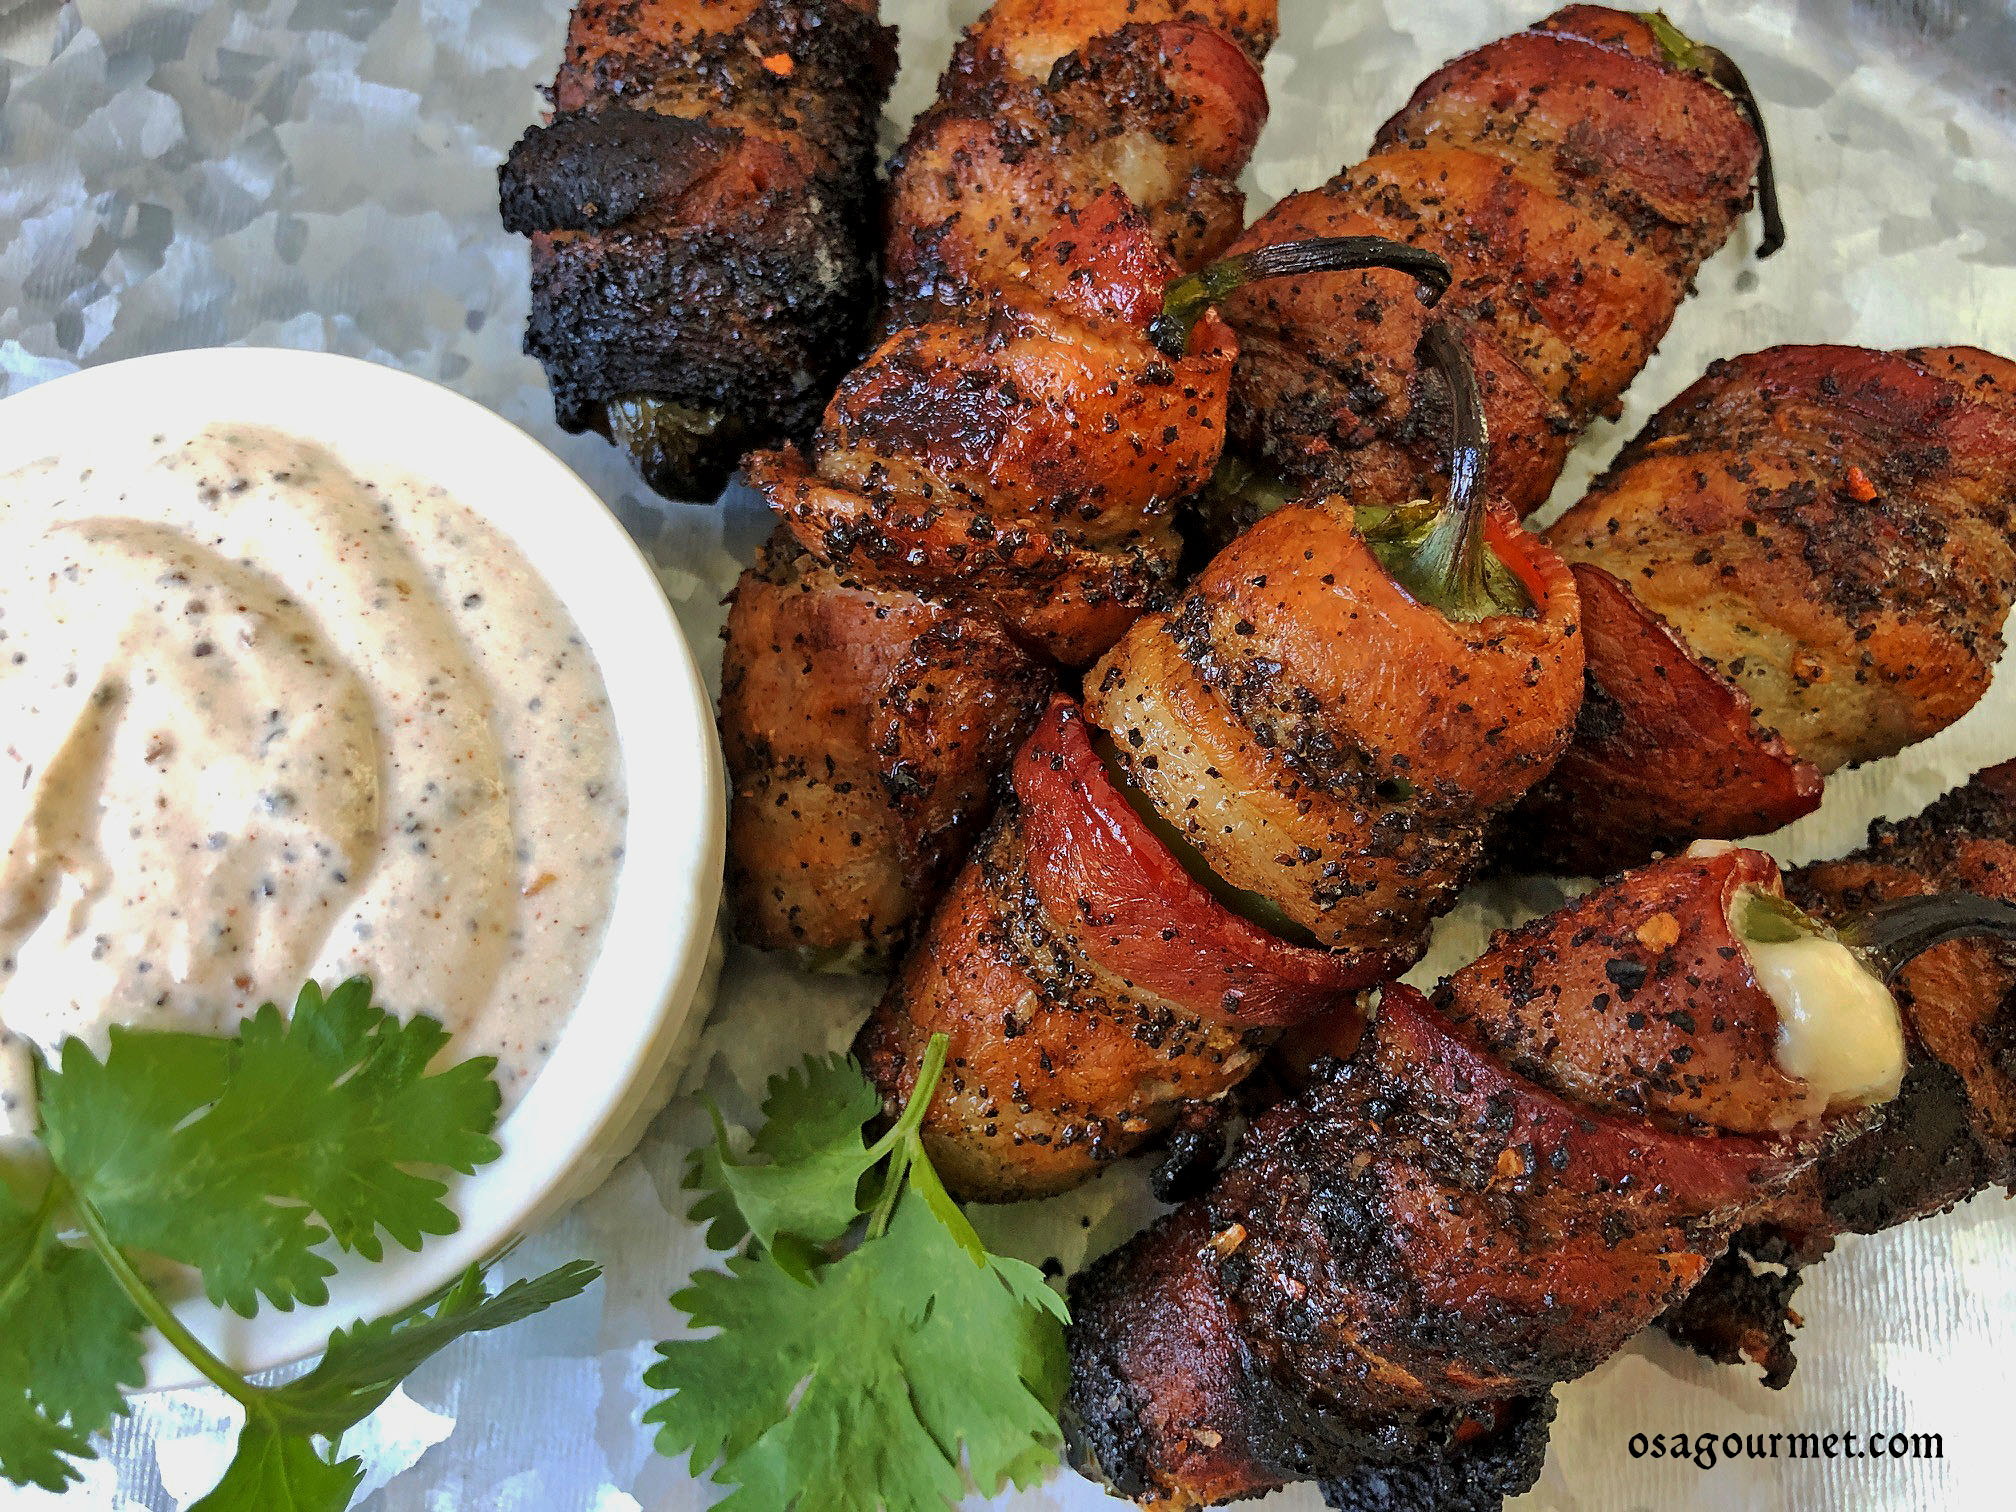 Bacon Wrapper Datil Cowboy Coffee Rub Crusted Jalapeno Poppers with Cowboy Coffee Rub Dip